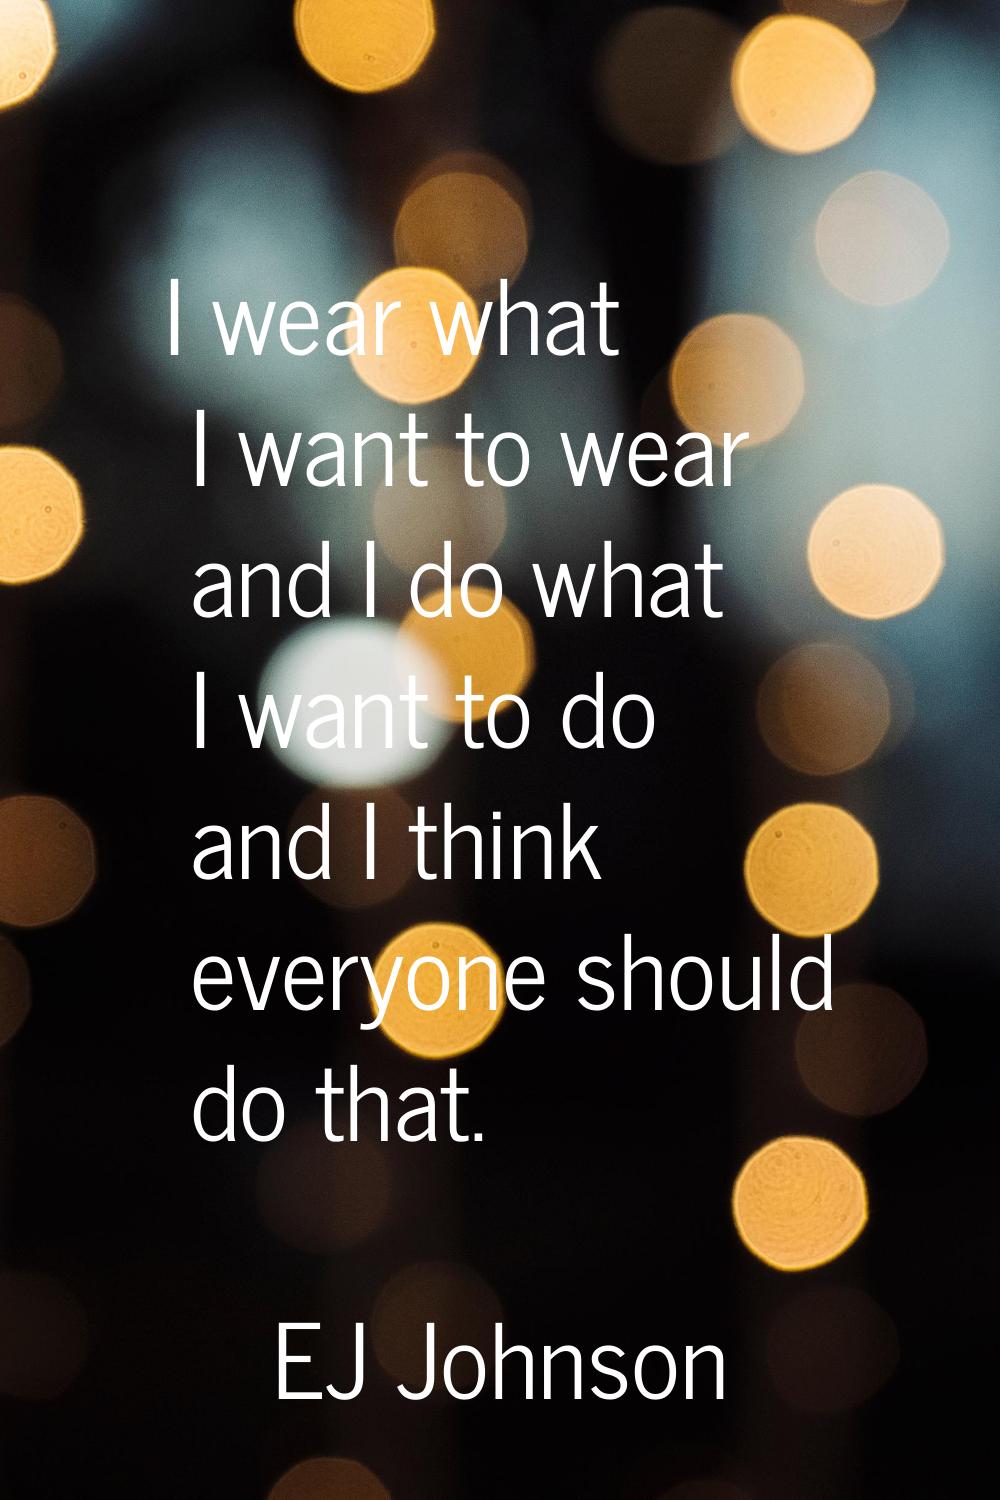 I wear what I want to wear and I do what I want to do and I think everyone should do that.